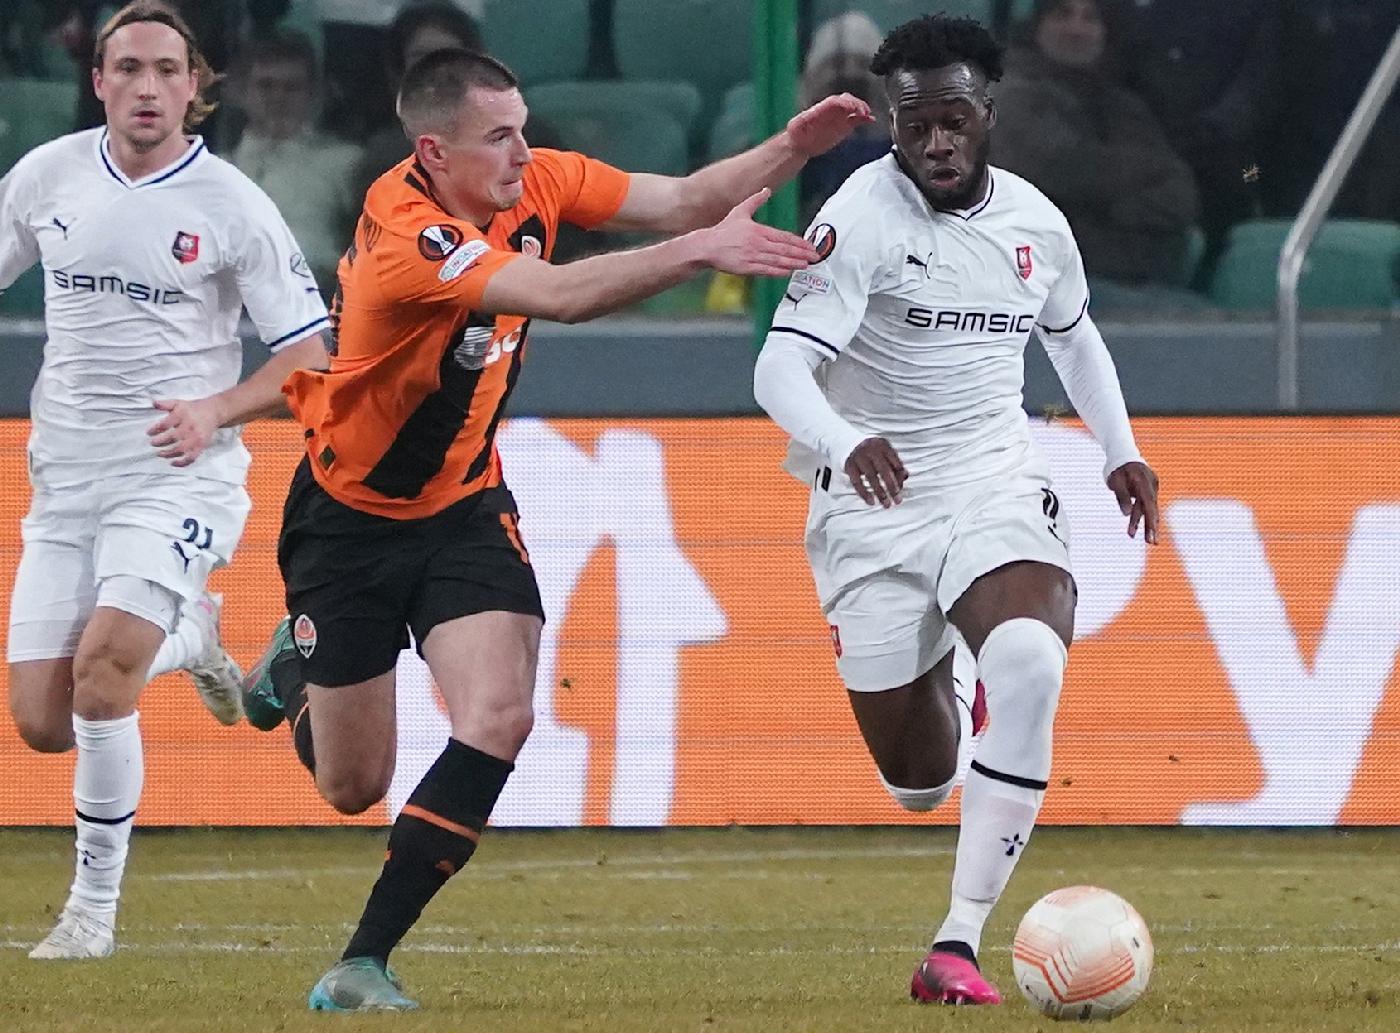 "Rennes vs Shakhtar: Where to Watch, Online Streaming (February 23)